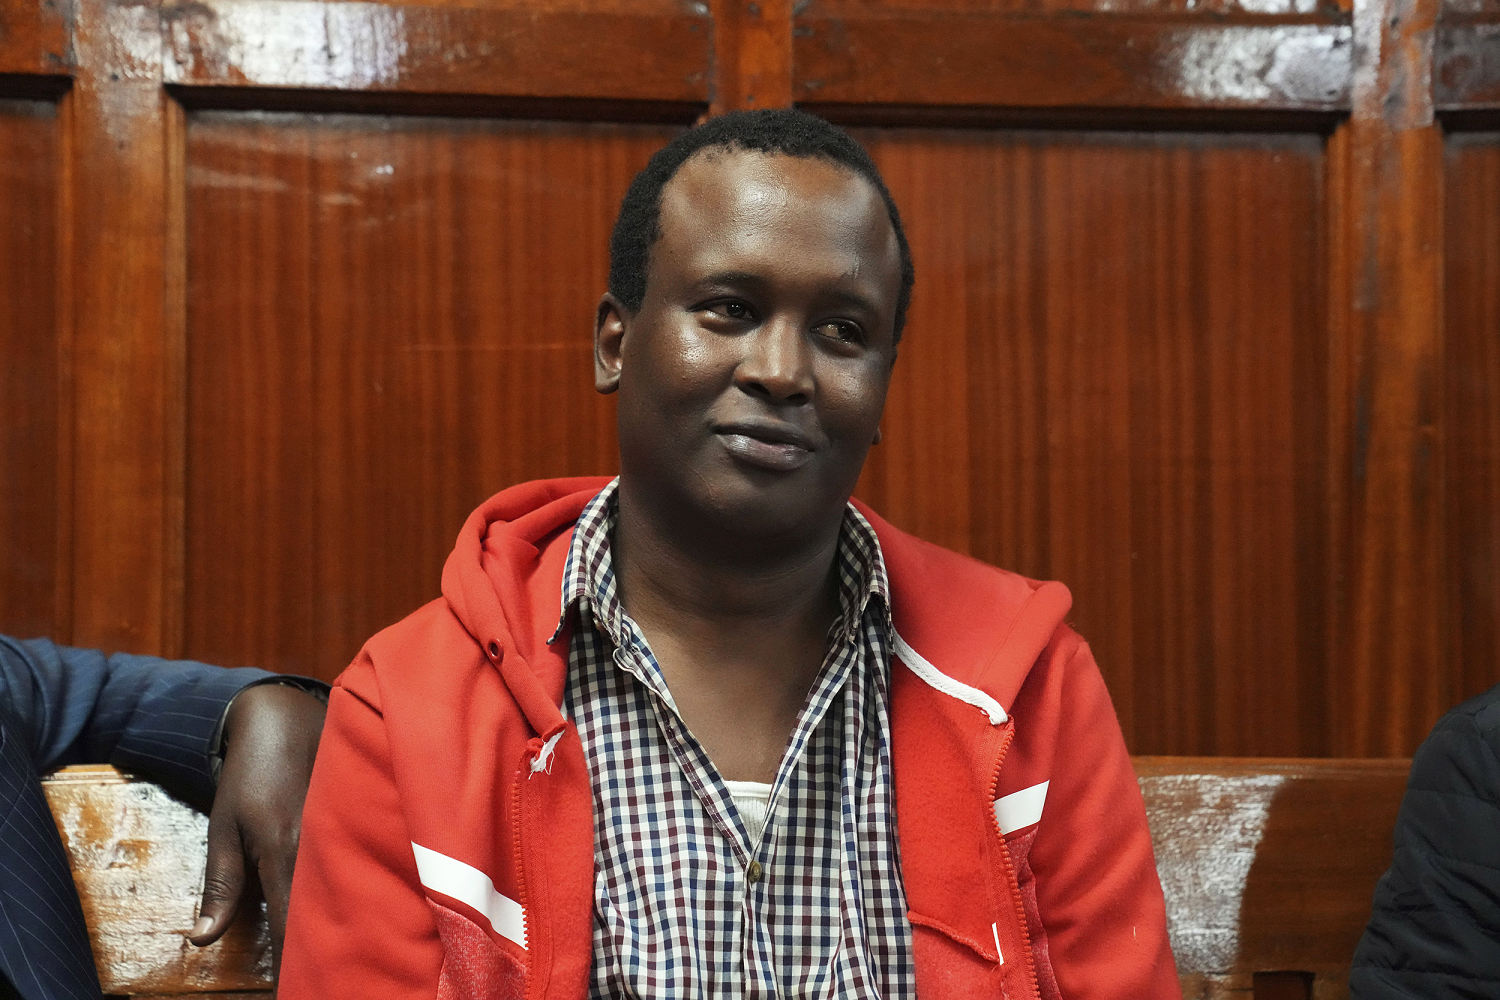 Man charged in Massachusetts woman's death rearrested in Kenya after escaping custody